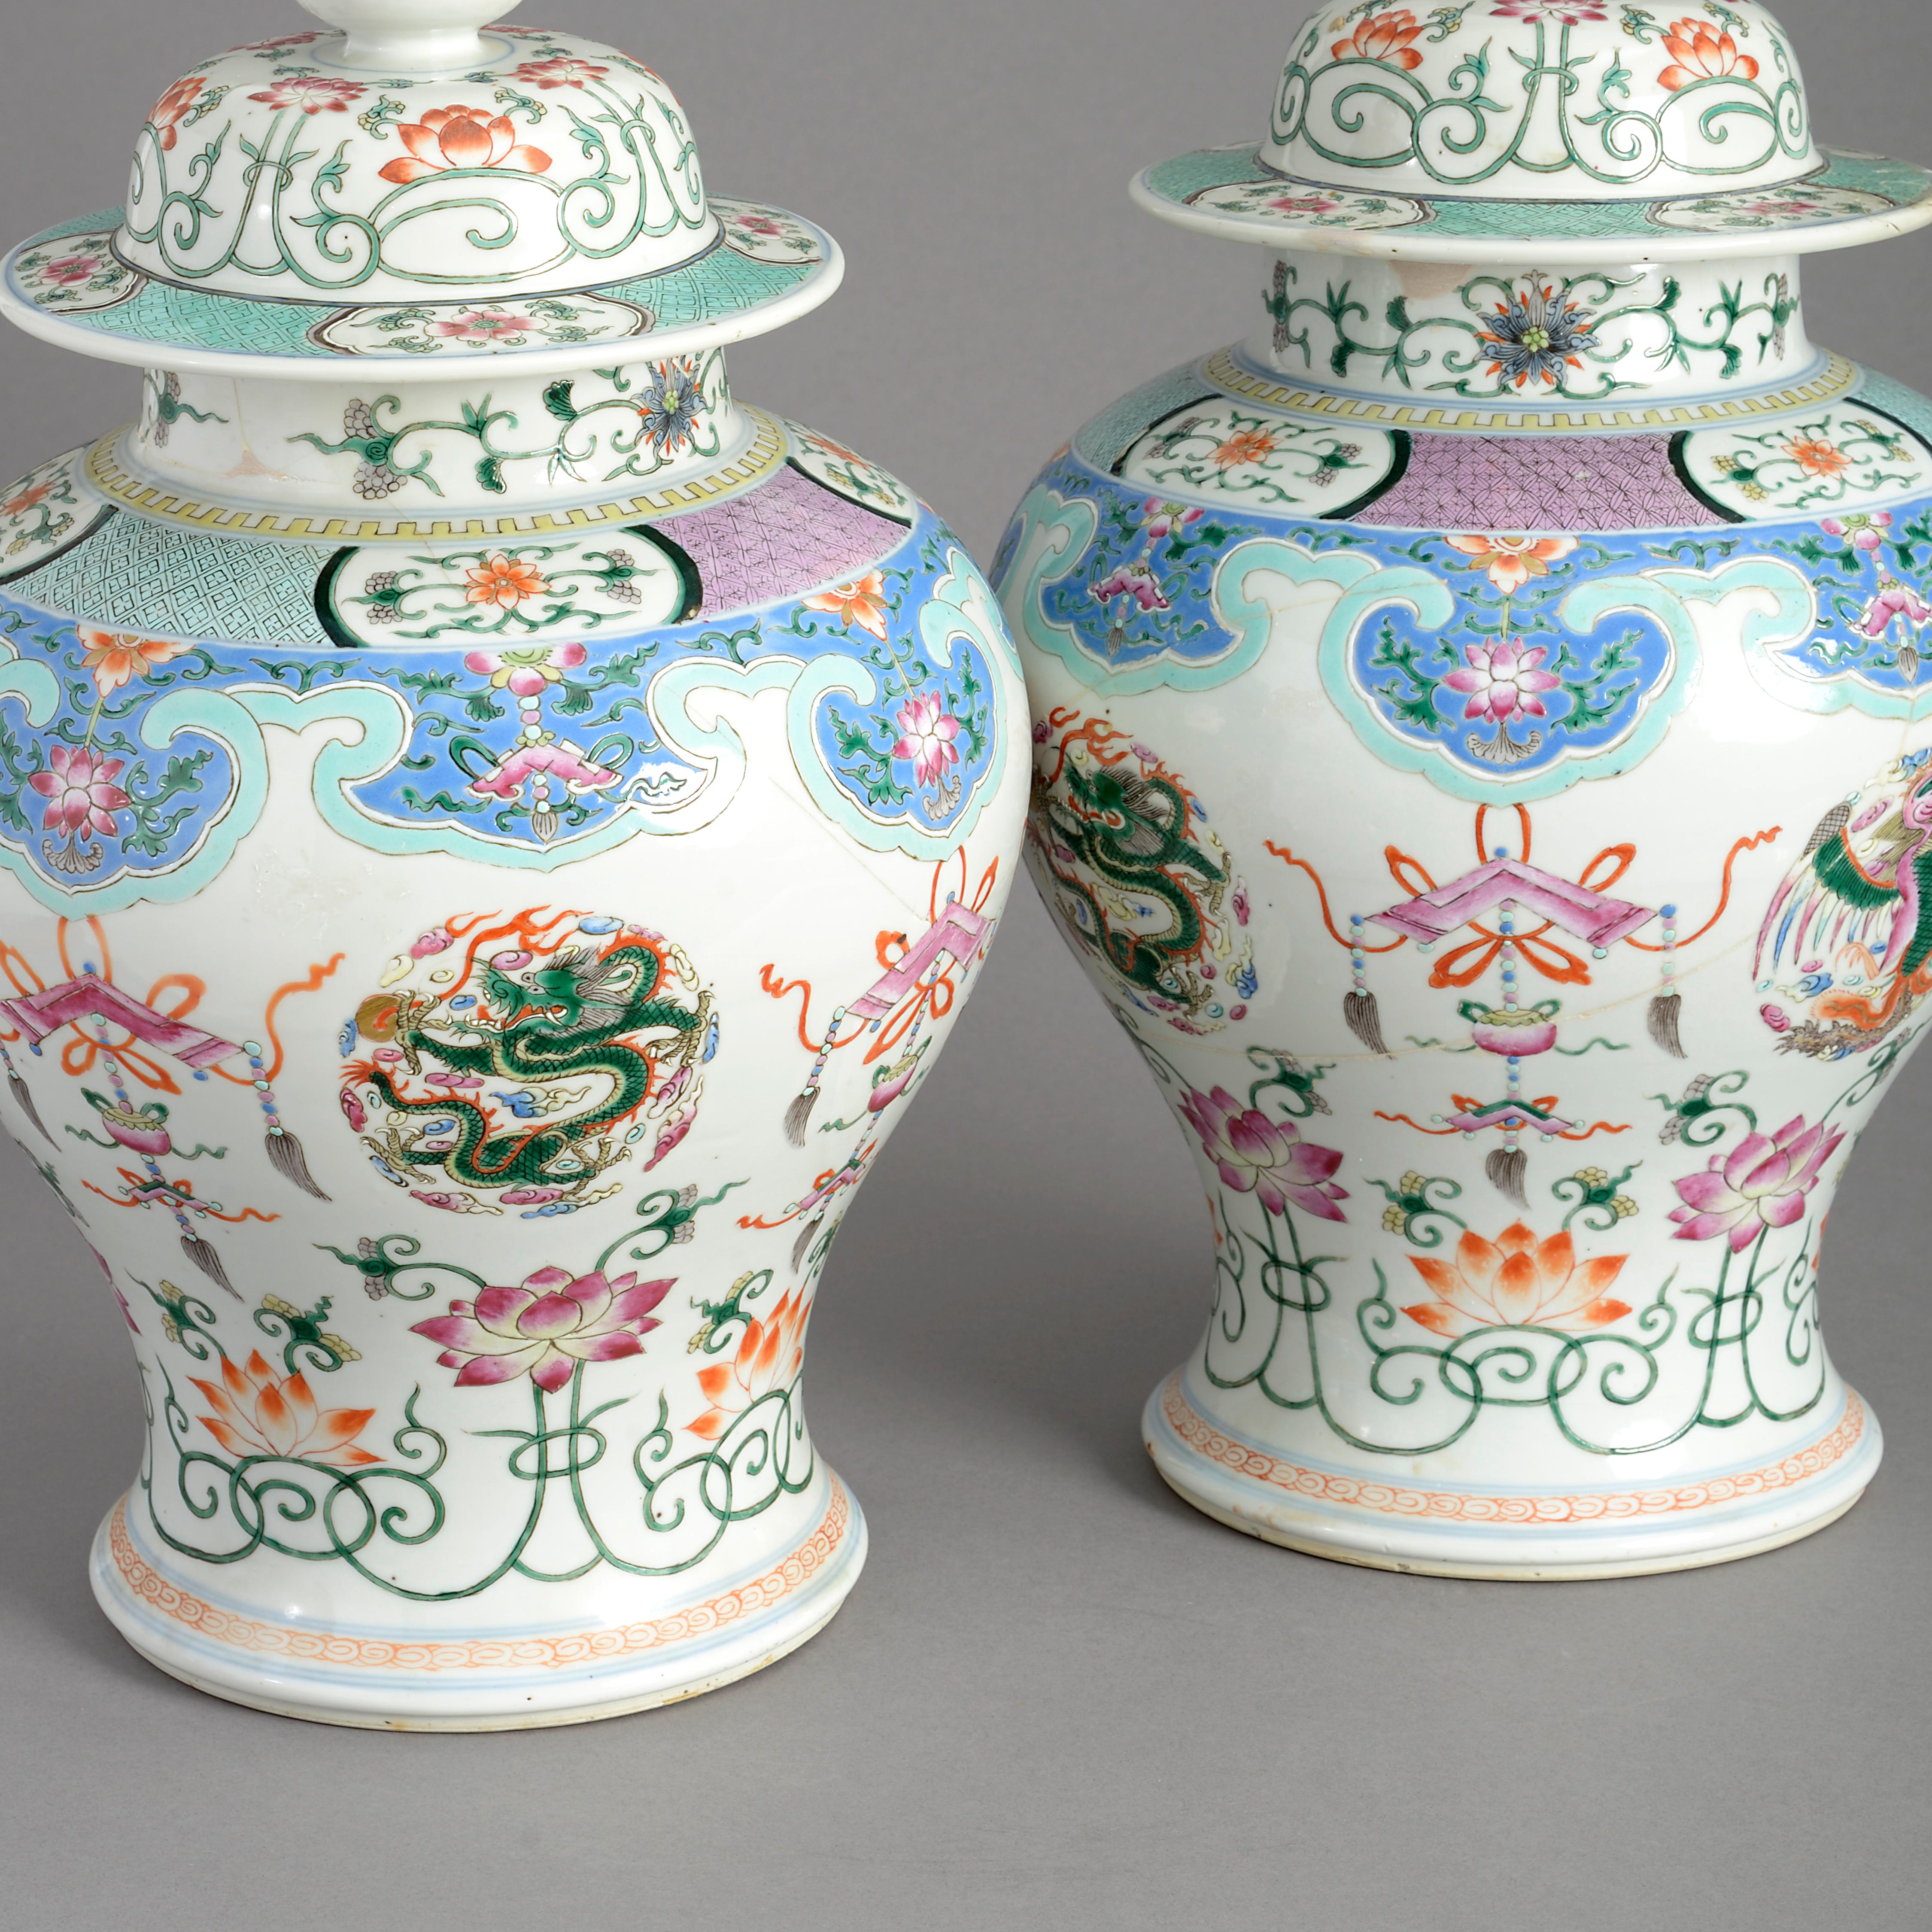 Fired Pair of 19th Century Famille Rose Porcelain Vases and Covers